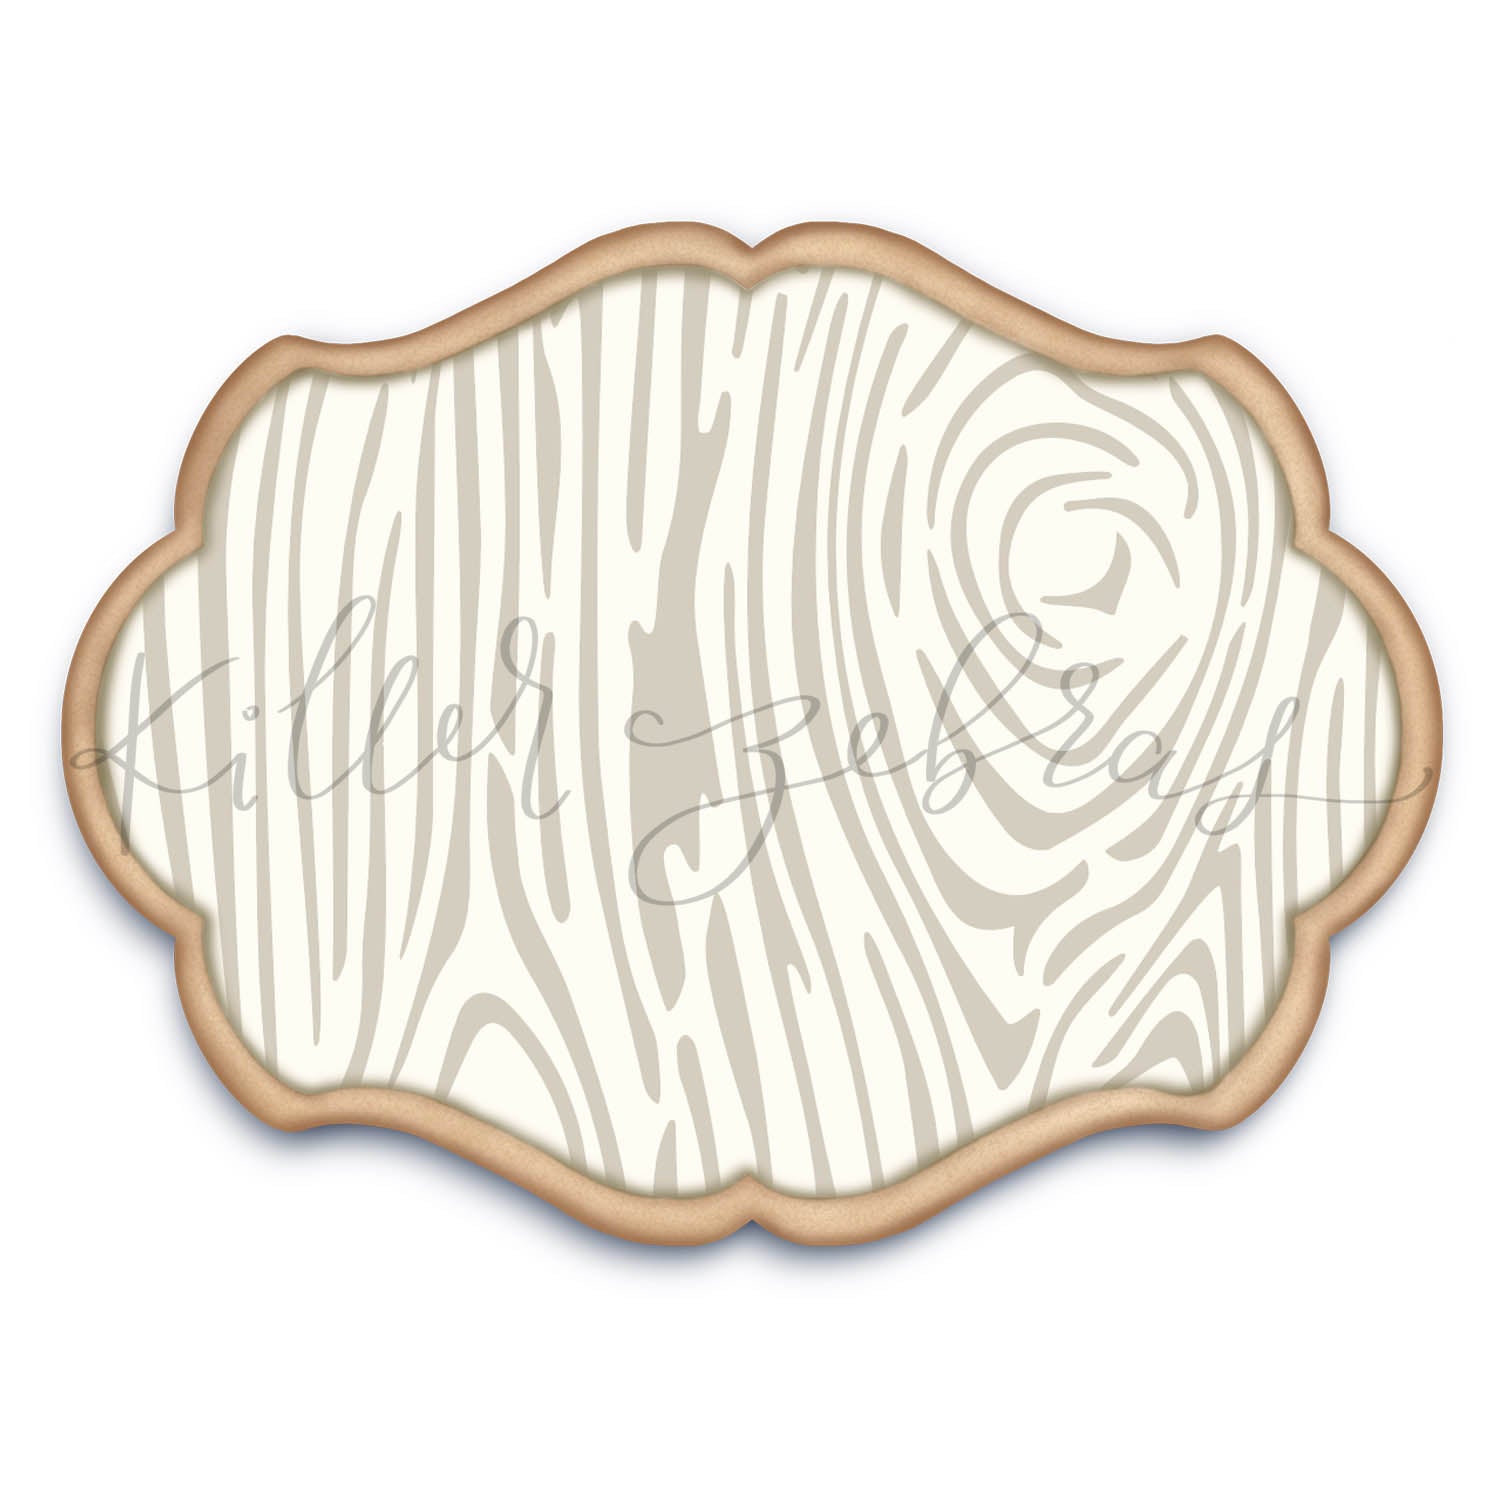 Cedar Shake Roof Cookie and Craft Stencil